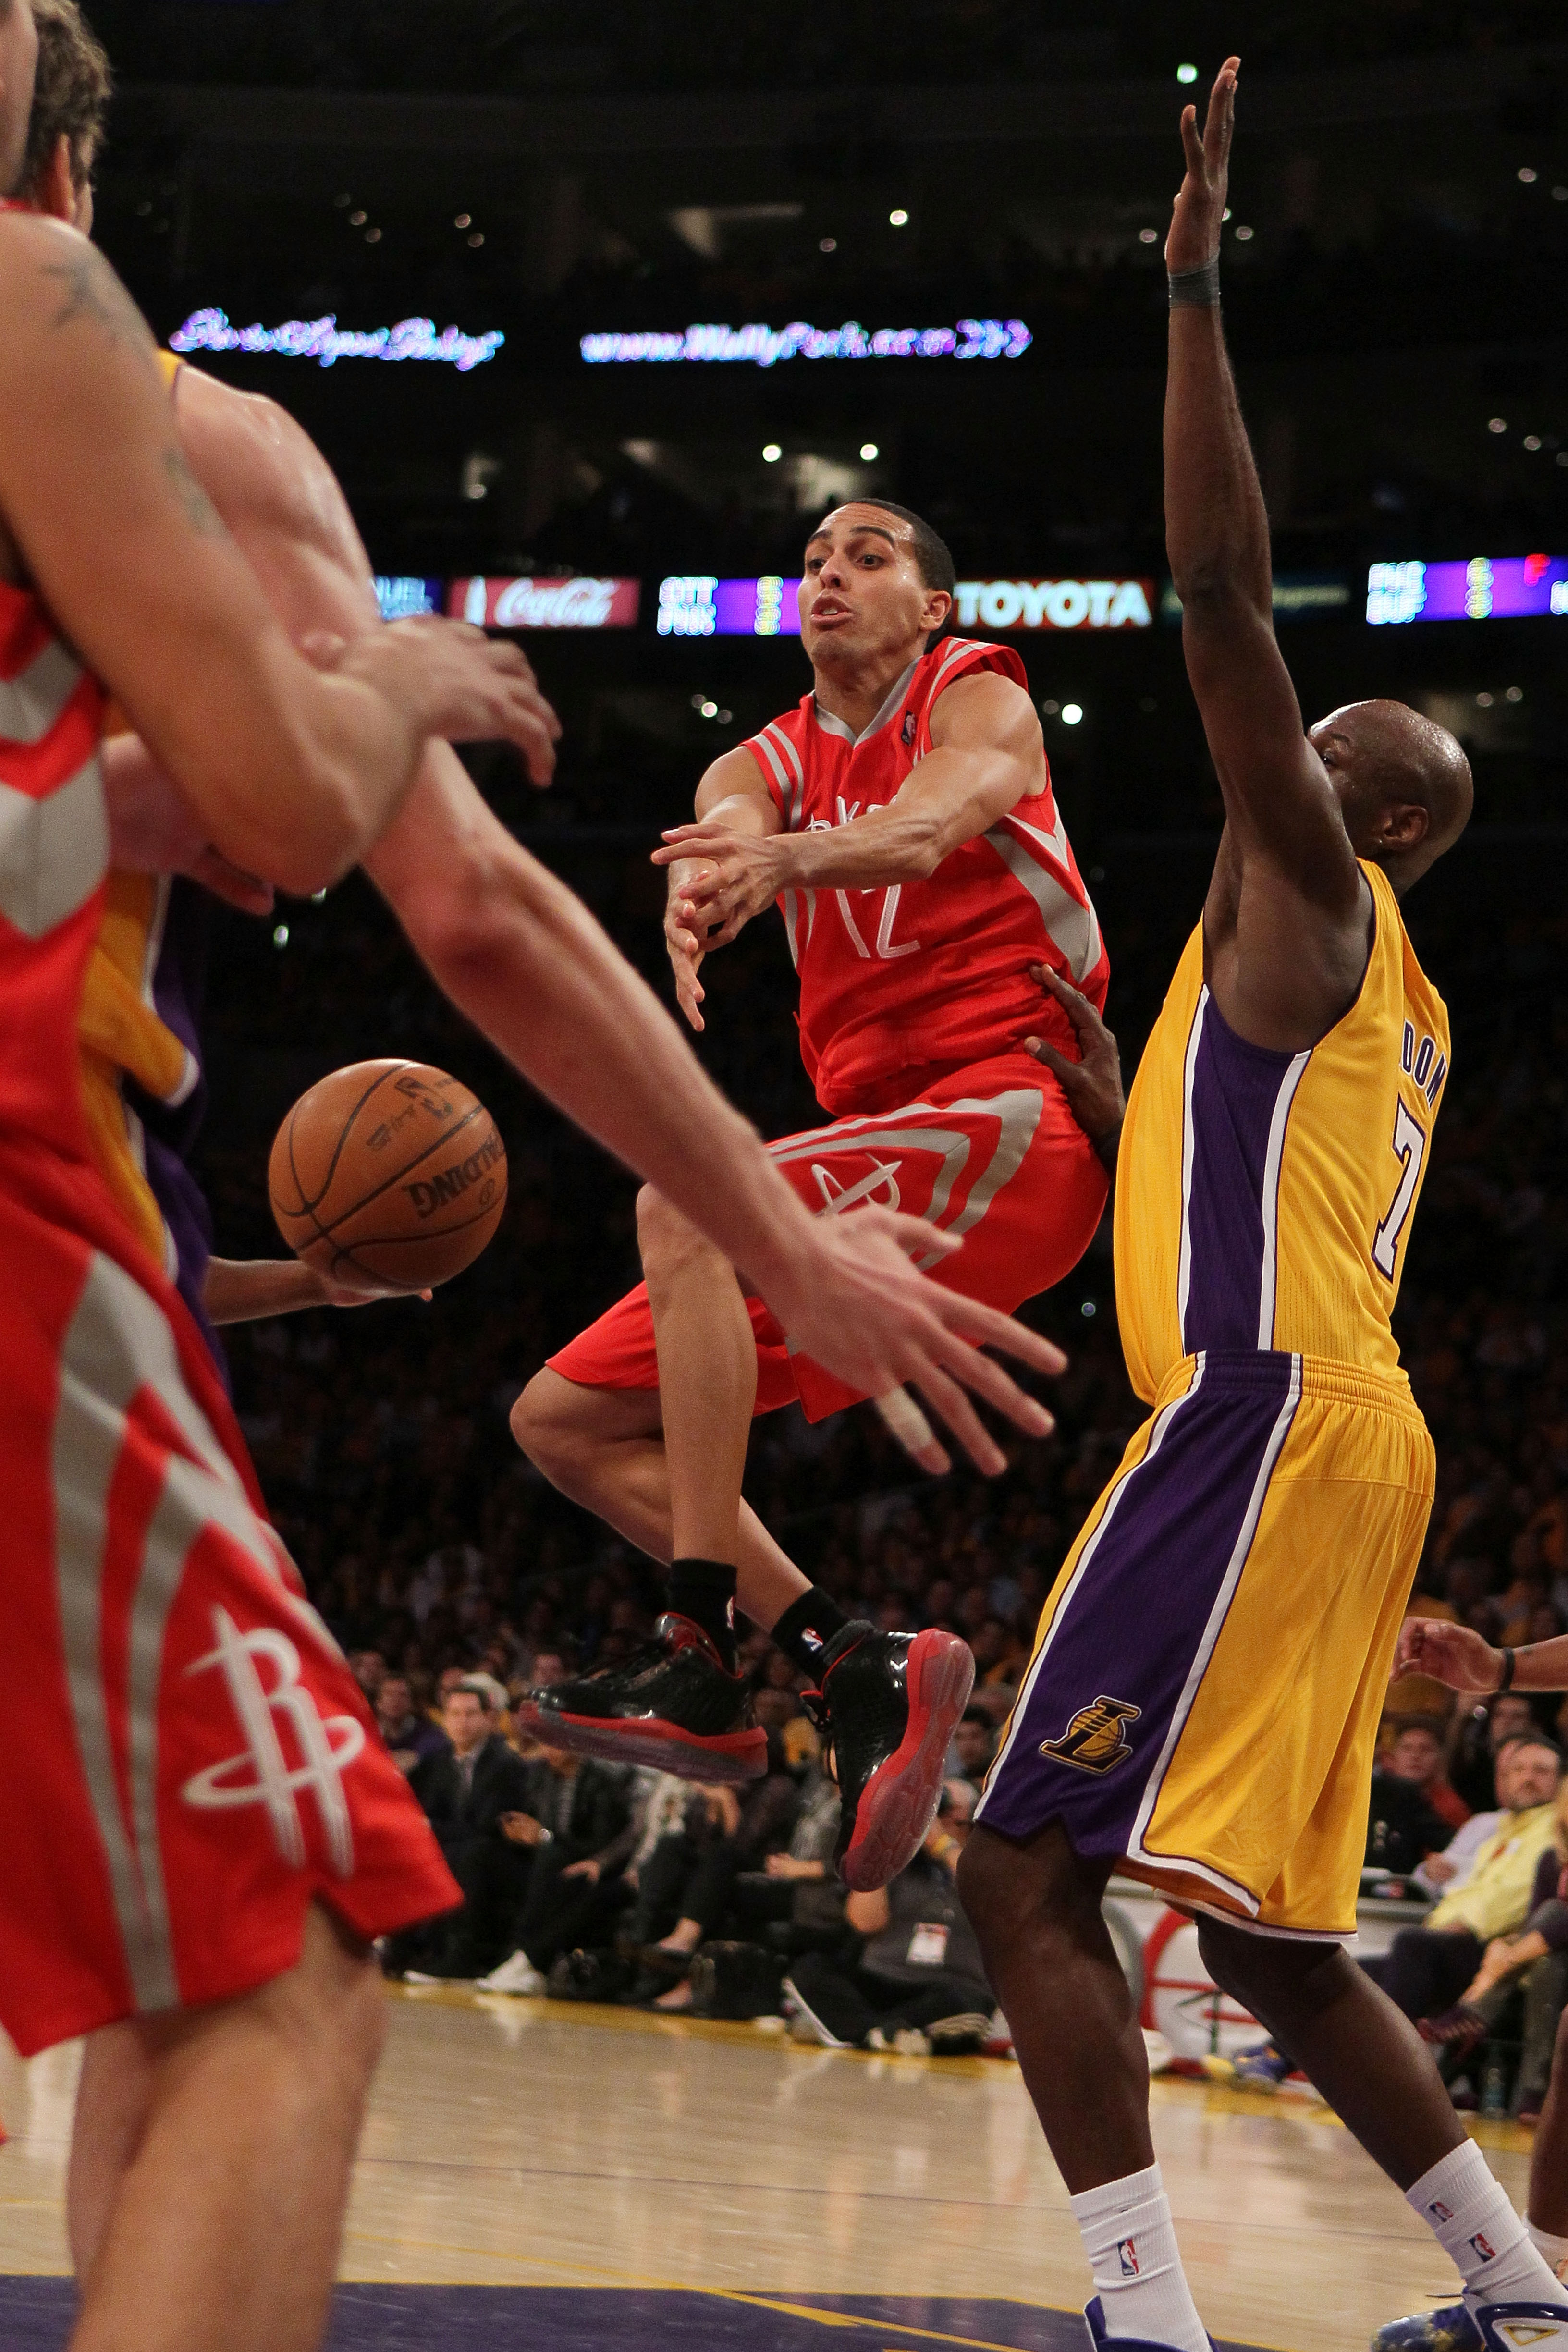 LOS ANGELES, CA - OCTOBER 26:  Kevin Martin #12 of the Houston Rockets loses control of the ball against the Los Angeles Lakers during their opening night game at Staples Center on October 26, 2010 in Los Angeles, California. NOTE TO USER: User expressly